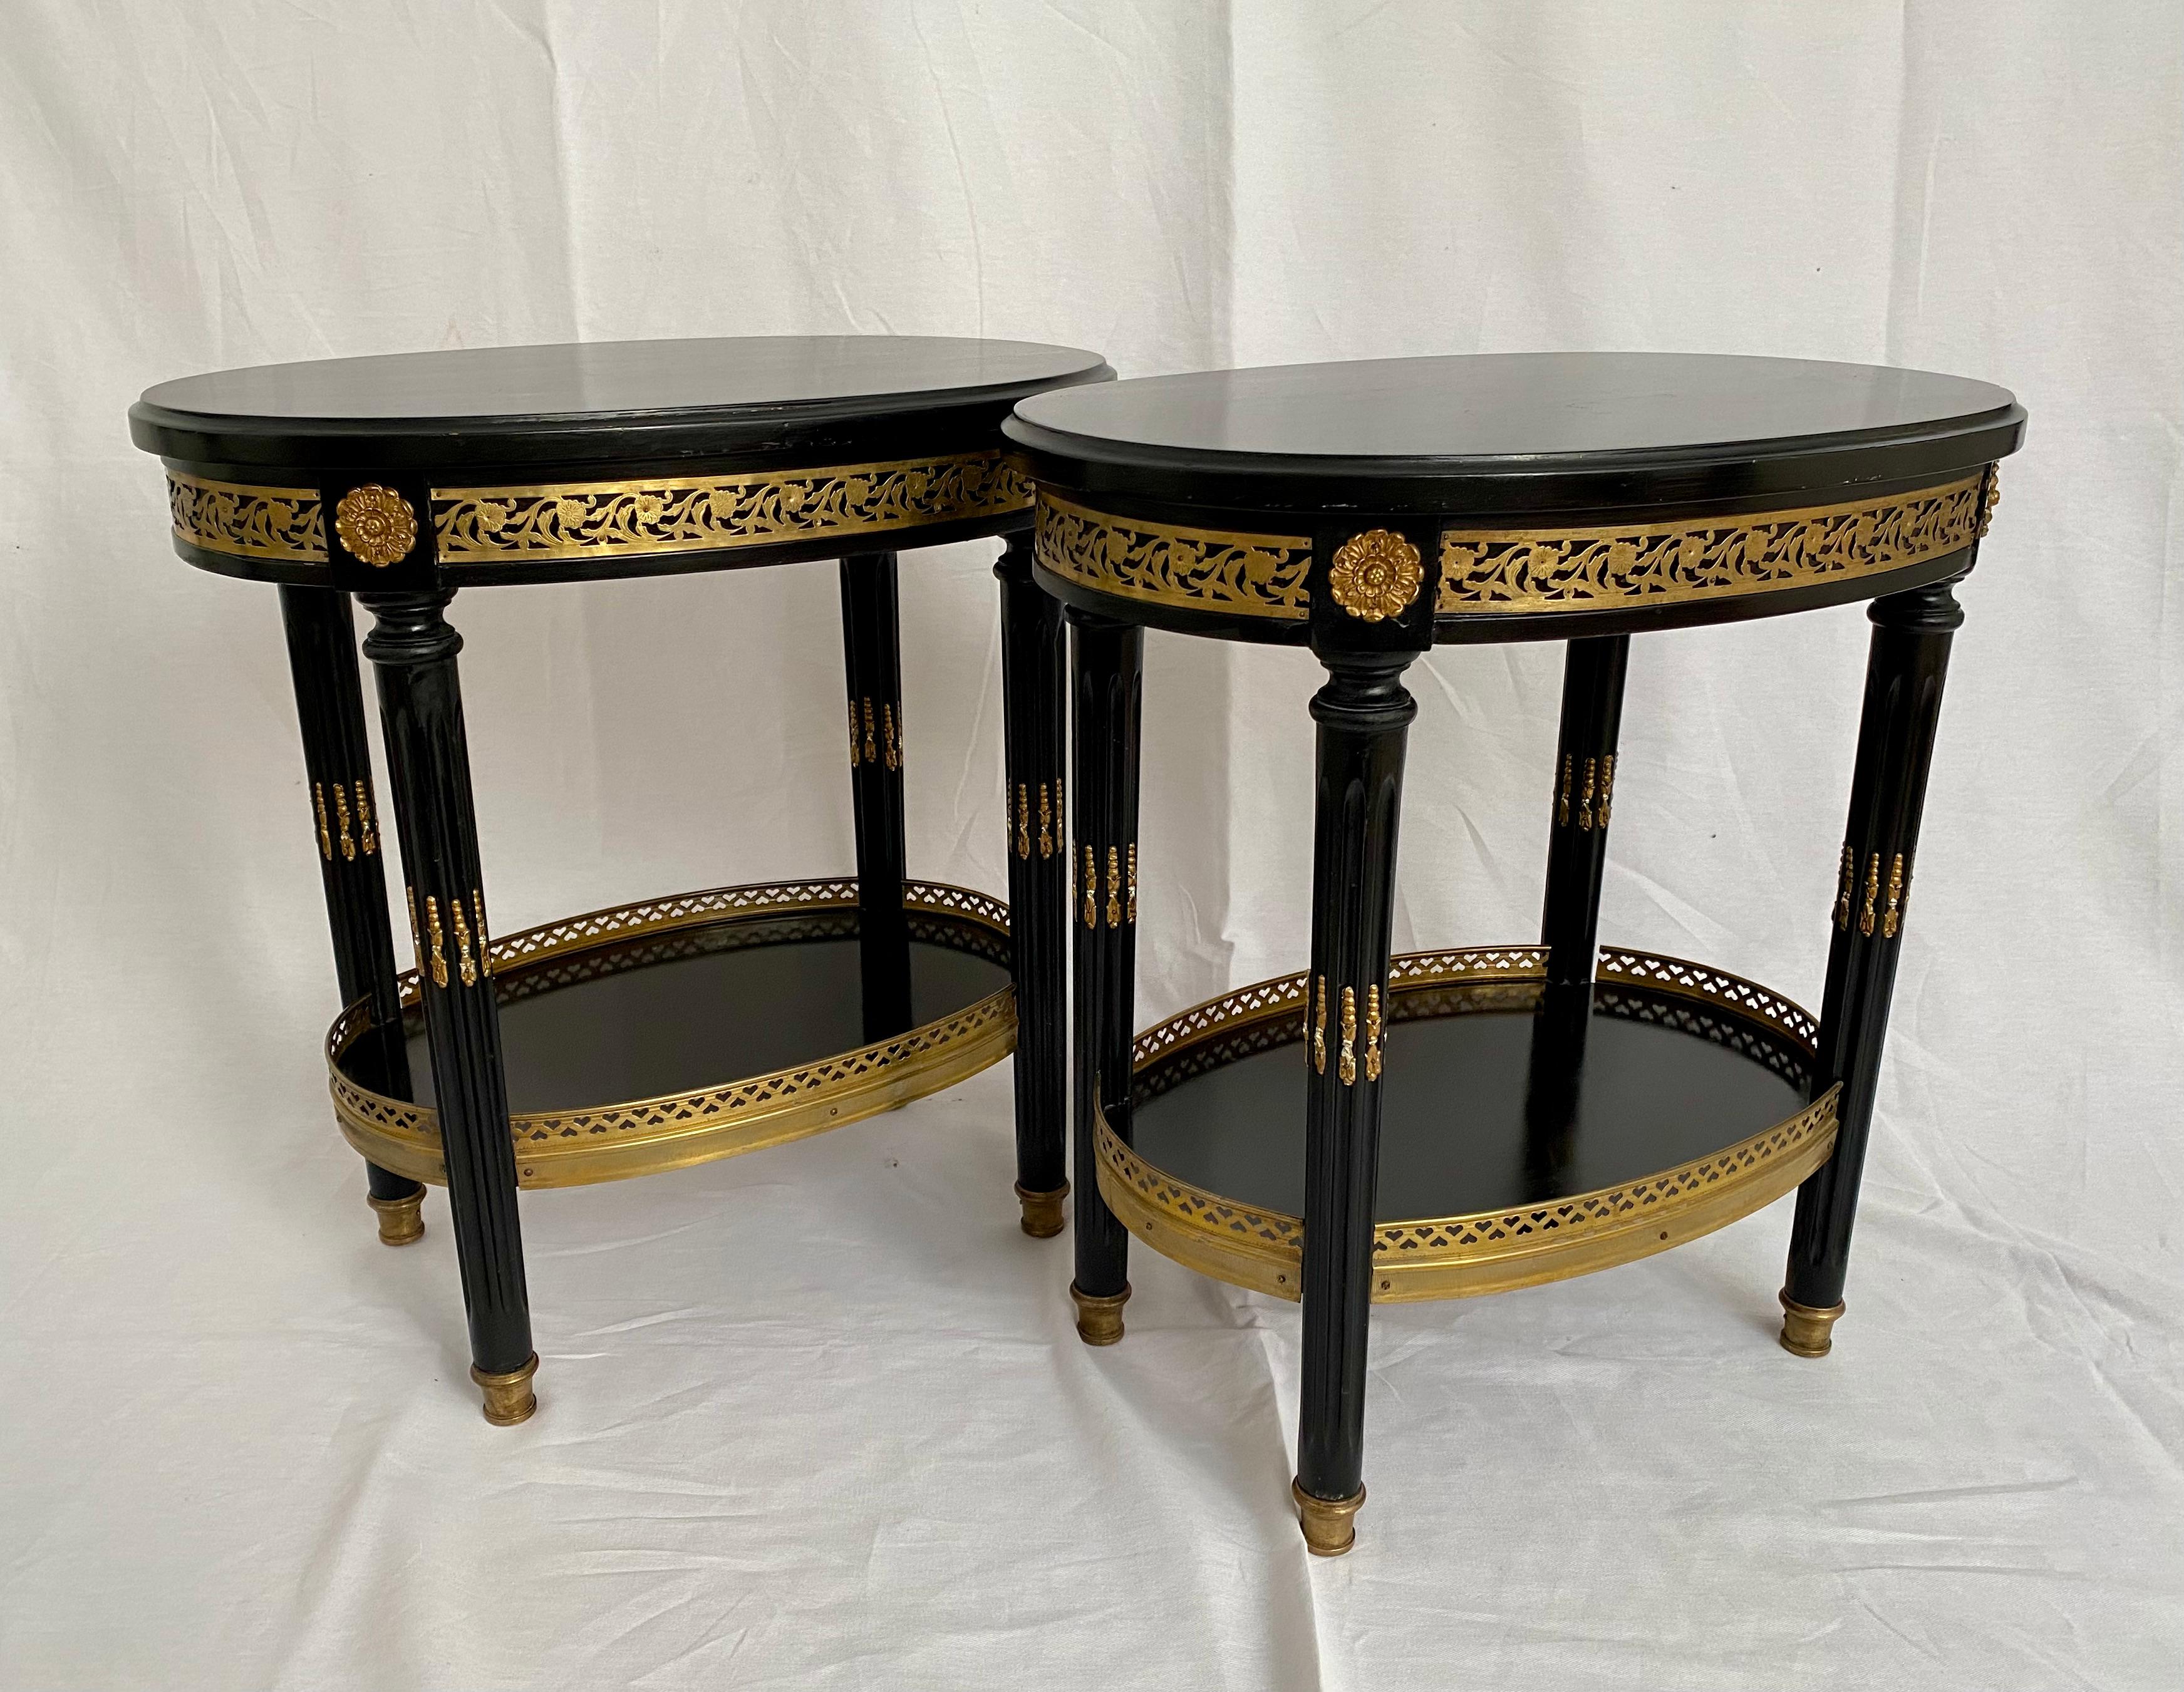 Rare, stamped, Maison Jansen, pair of French Louis XVI style ebonized oval side tables, in the glamorous style of Hollywood Regency. This two-tiered, pair of black lacquer tables is composed of ebonized wood with tôle and bronze hardware detail,